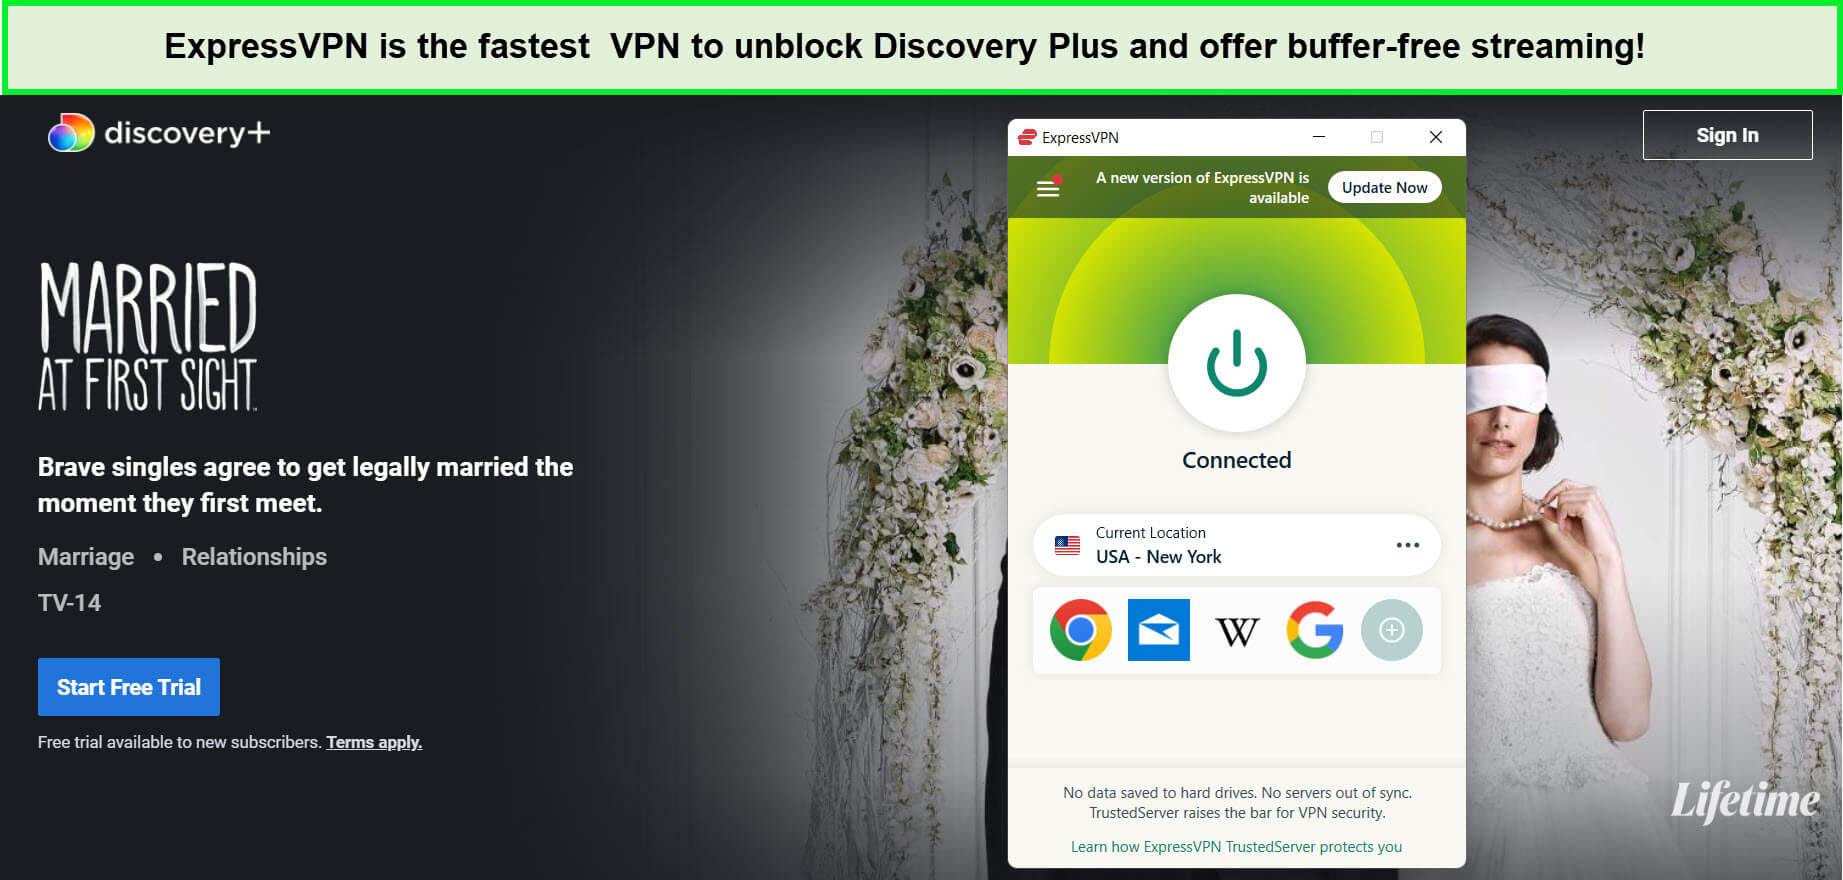 expressvpn-unblocks-married-at-first-sight-journey-so-far-nashville-on-discovery-plus-in-new-zealand